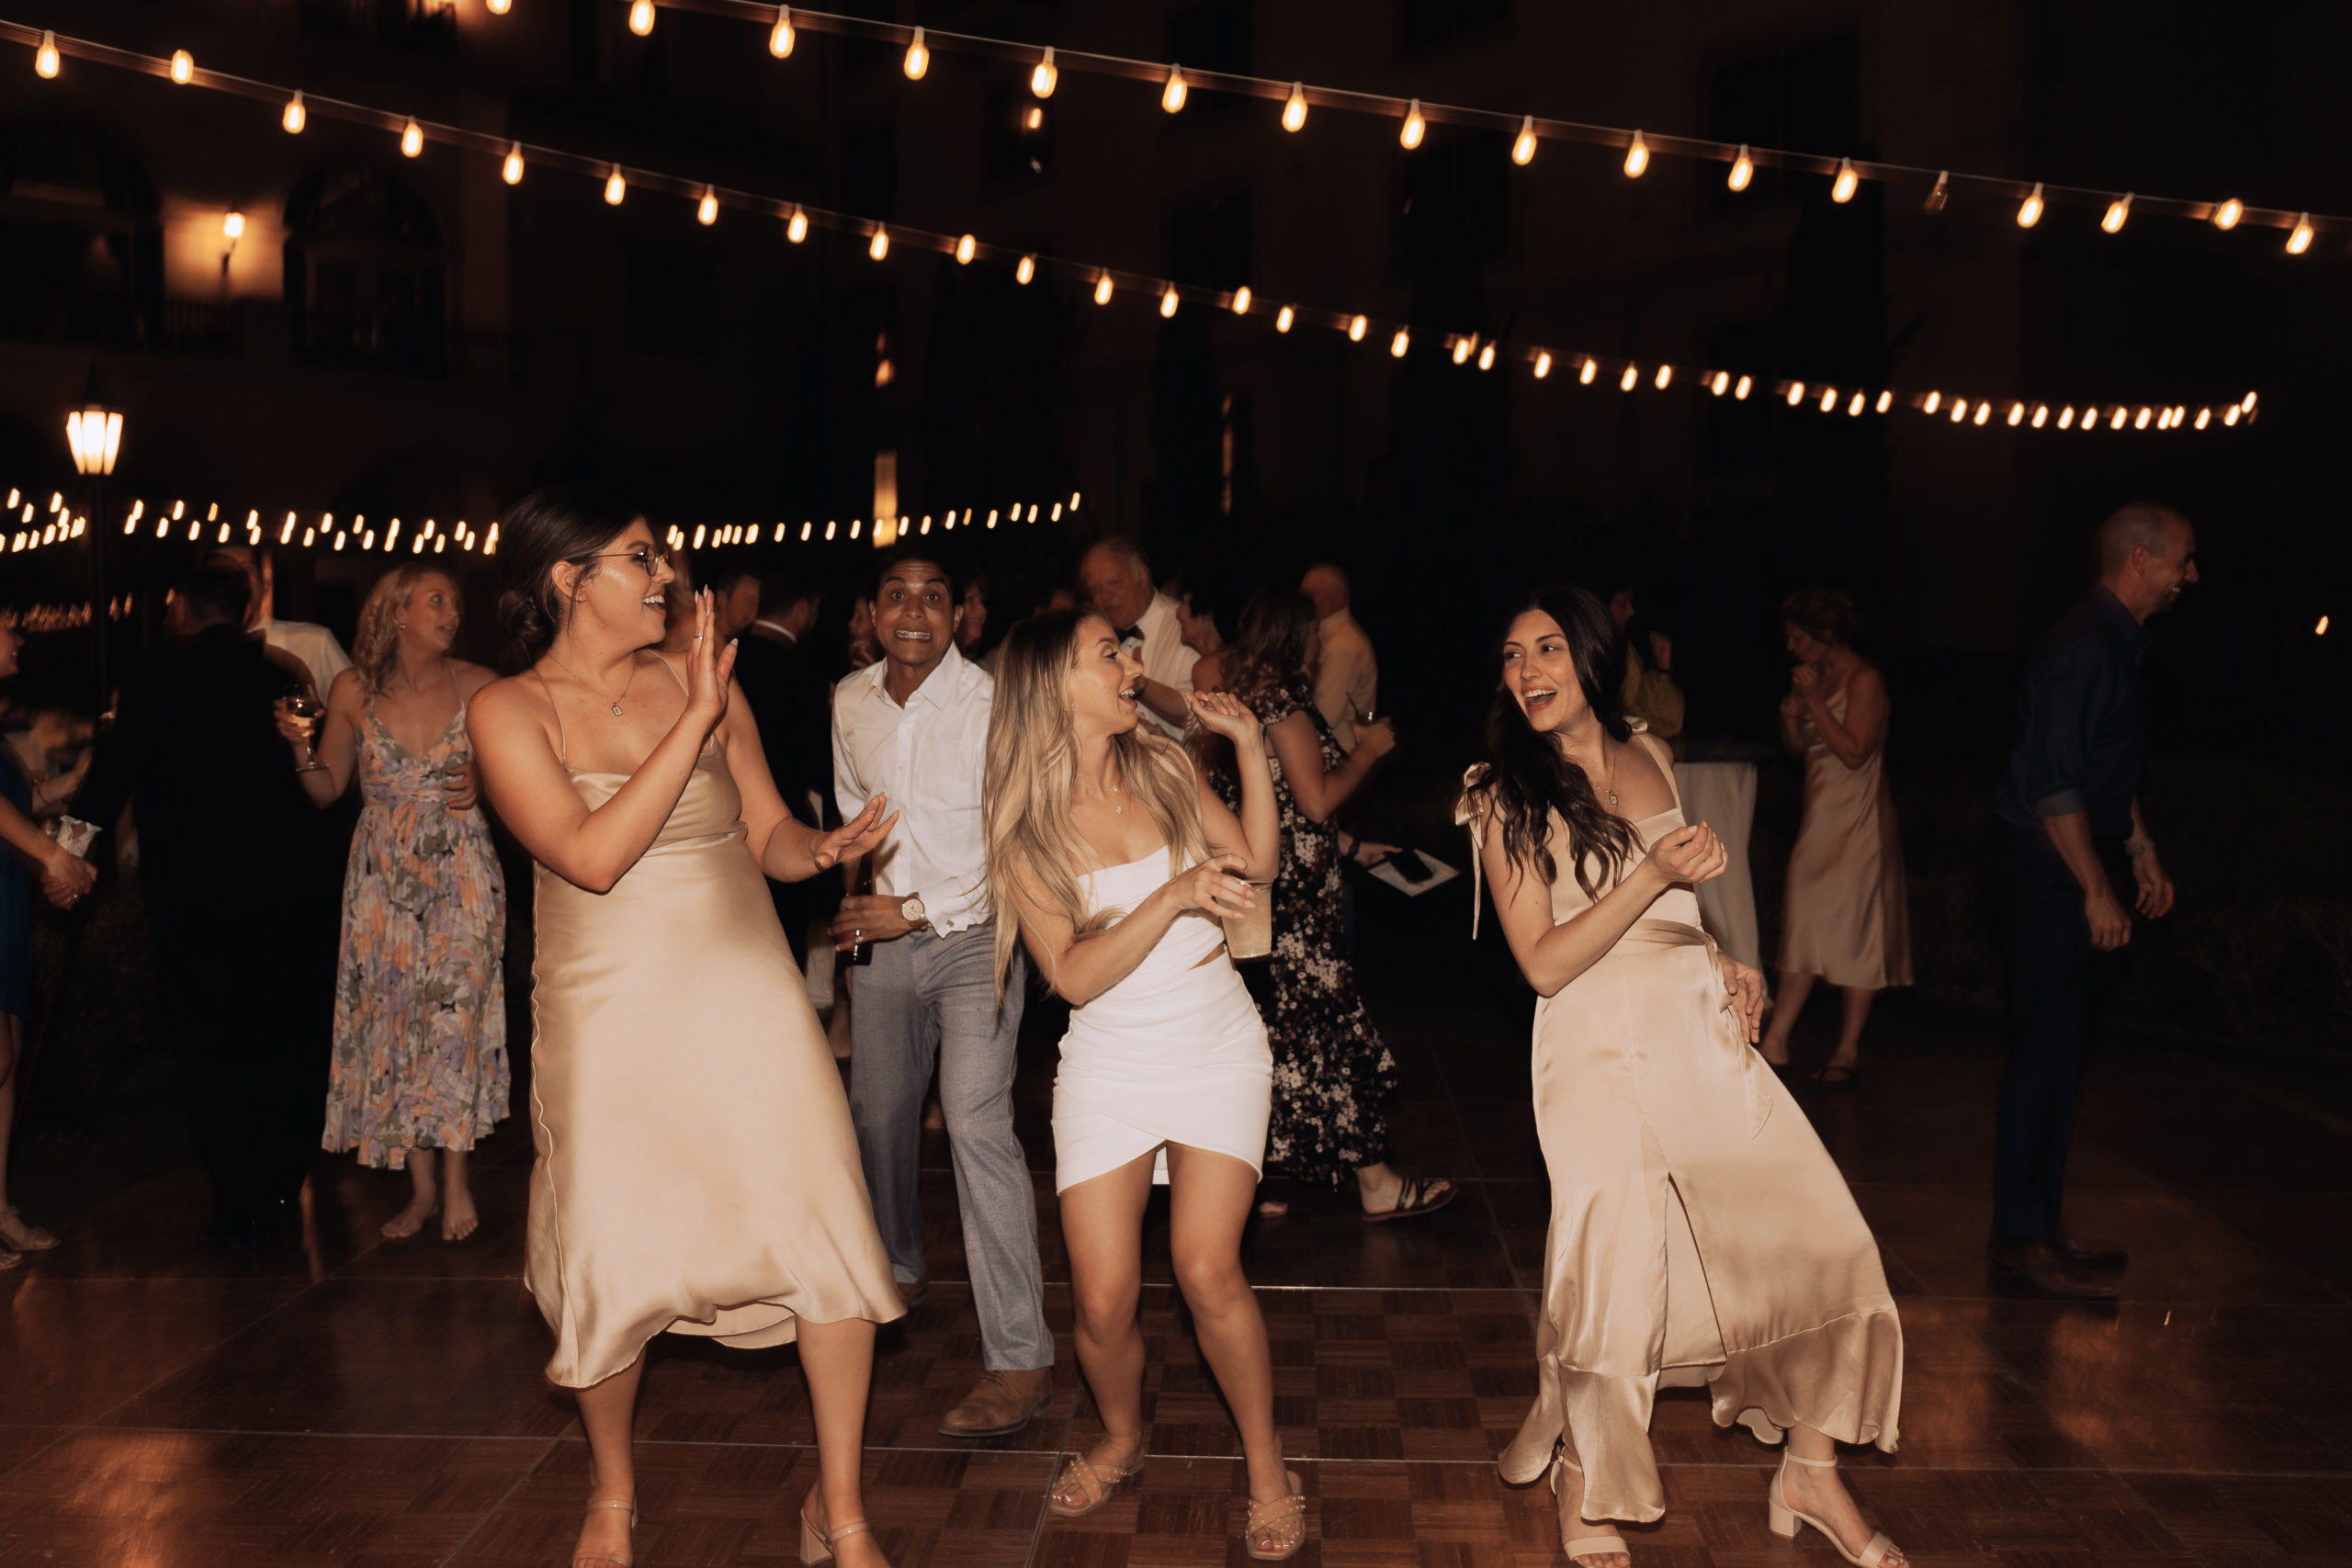 Lake Las Vegas Meets Modern Boho Bride. Bride changes into a second outfit for reception and hits the dance floor with the bridesmaid and guest